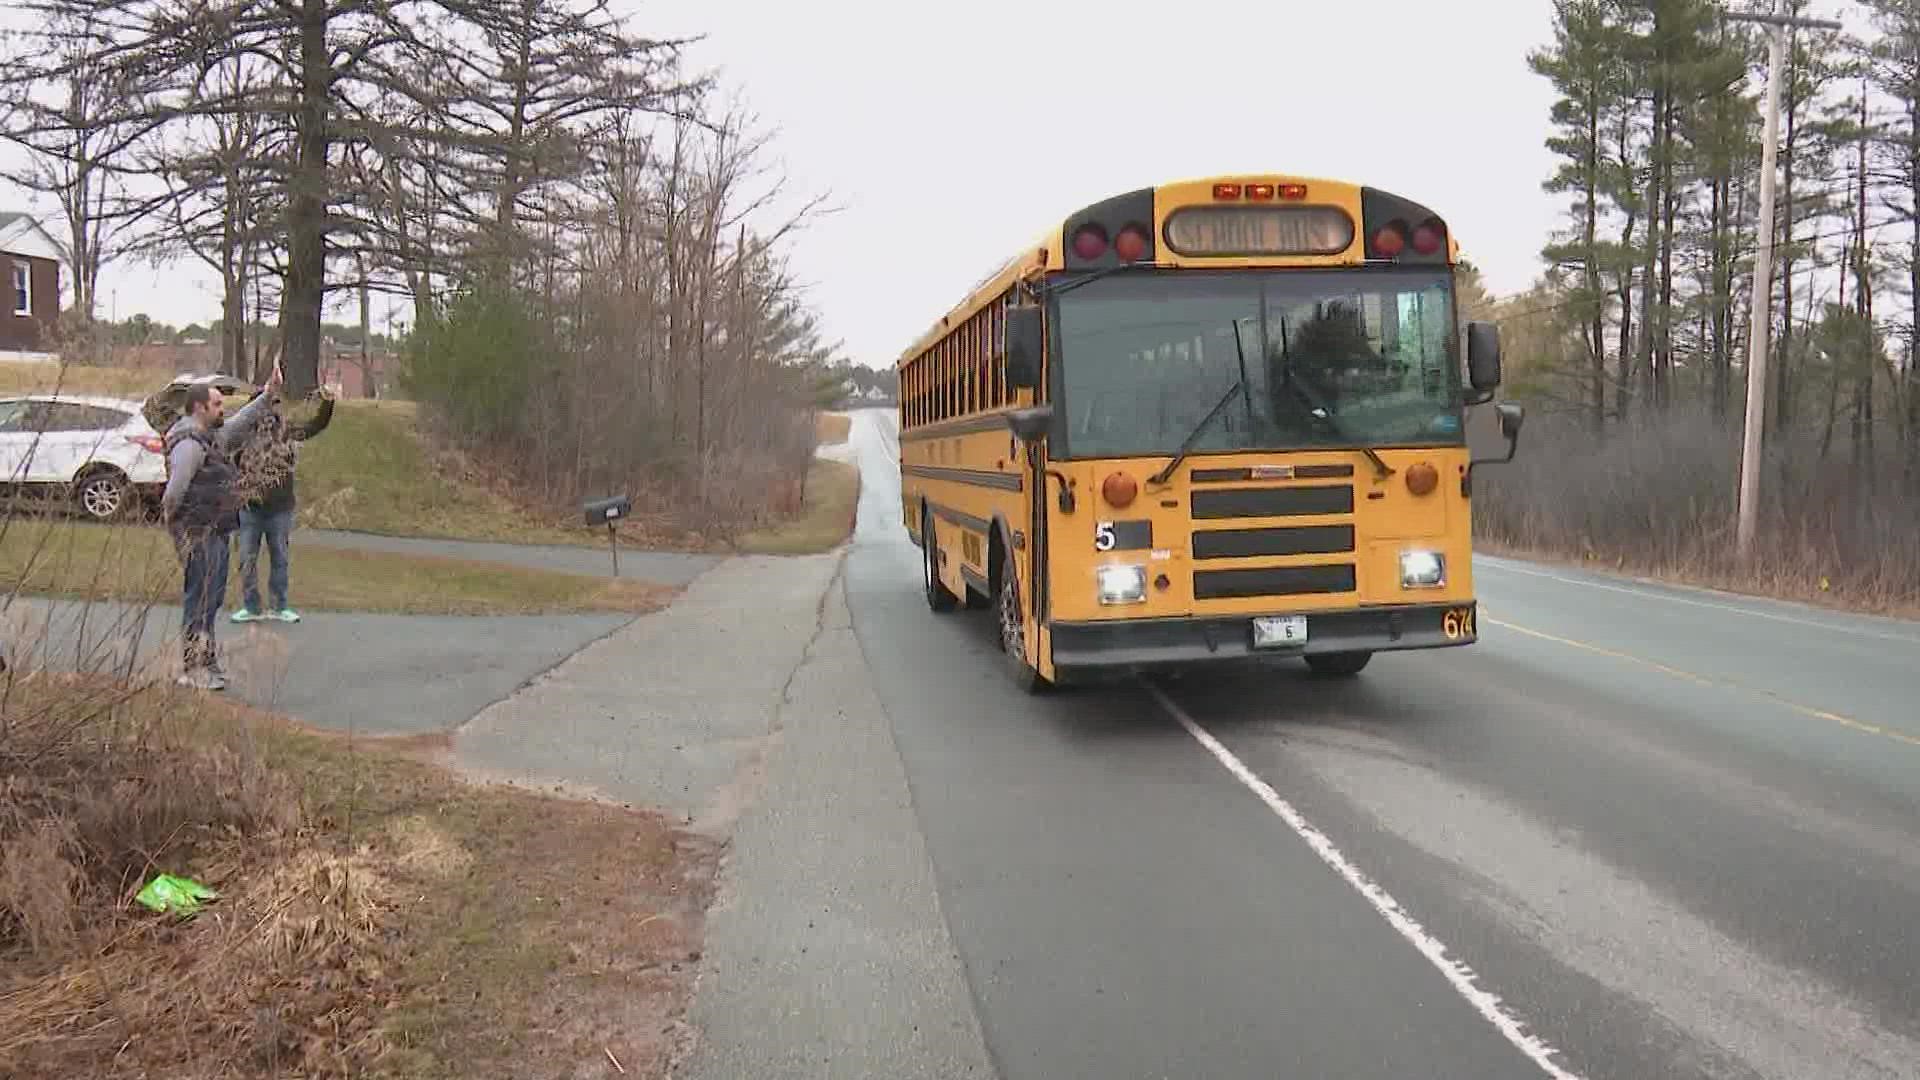 They're hoping to capture video footage of drivers who break the law and put kids in danger.